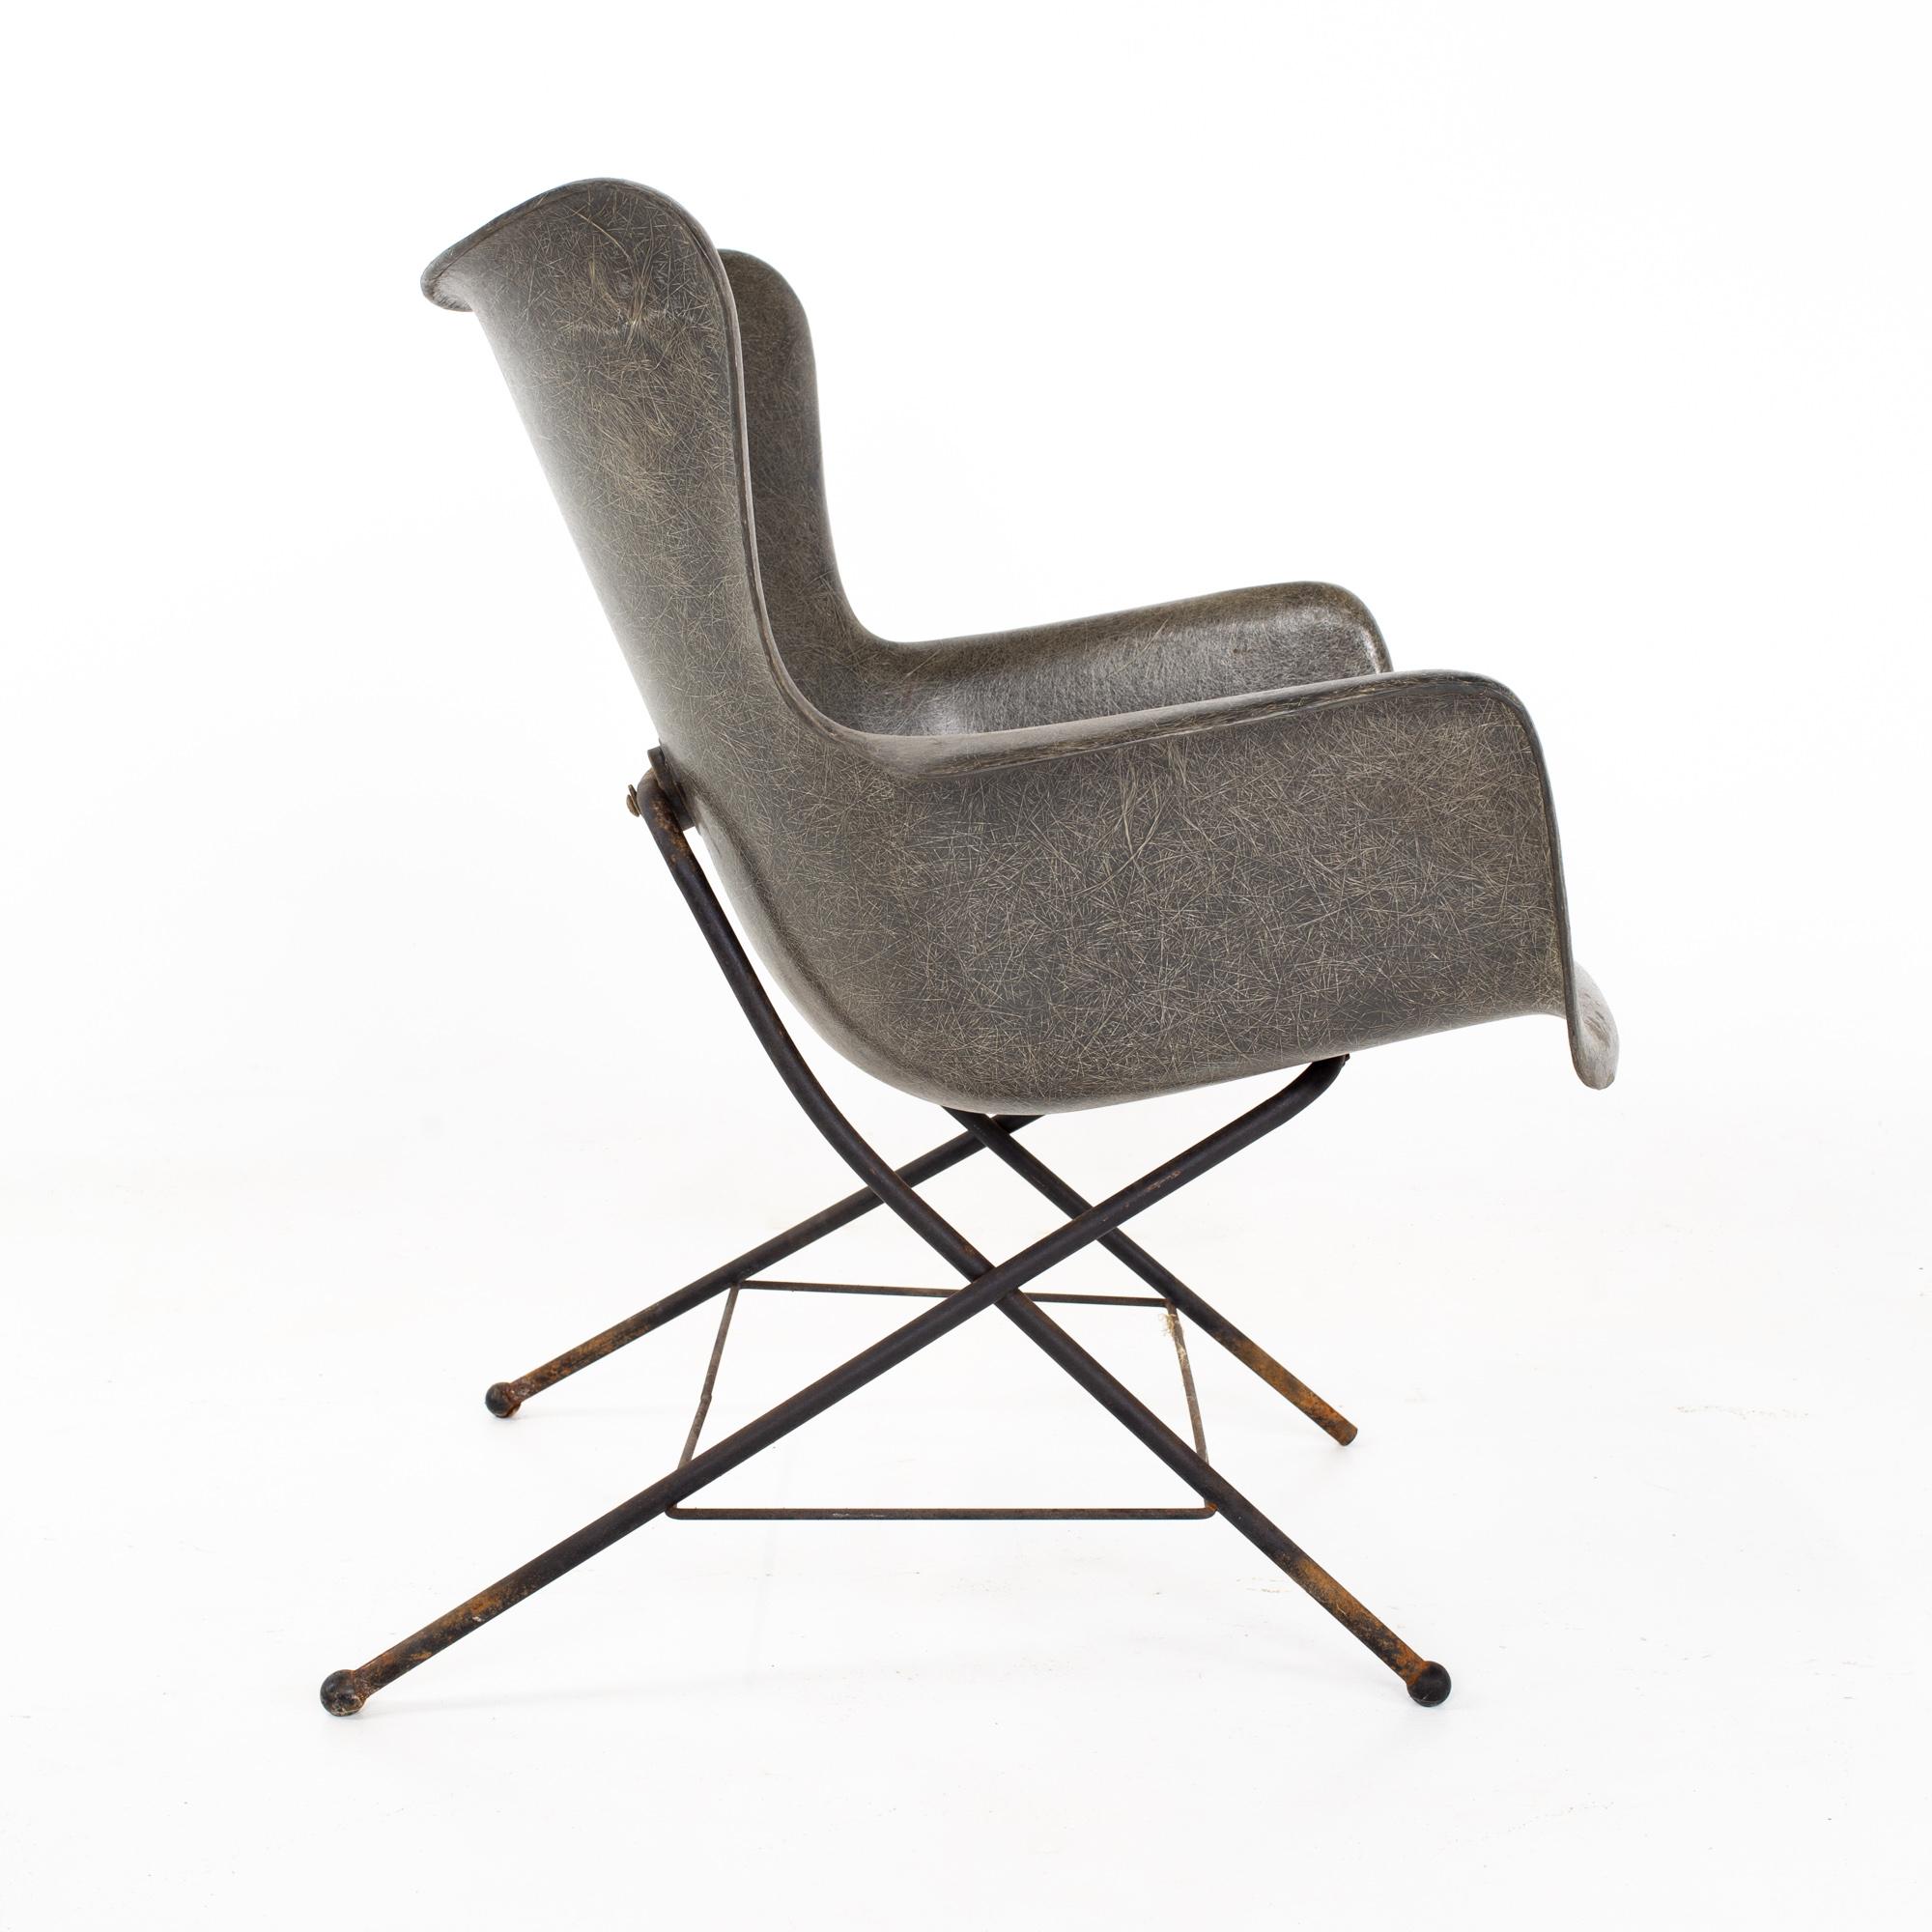 Lawrence Peabody for Selig mid century wingback fiberglass shell chair - black

Chair measures: 27.5 wide x 25 deep x 32.25 high, with a seat height of 15.5 inches

All pieces of furniture can be had in what we call restored vintage condition.